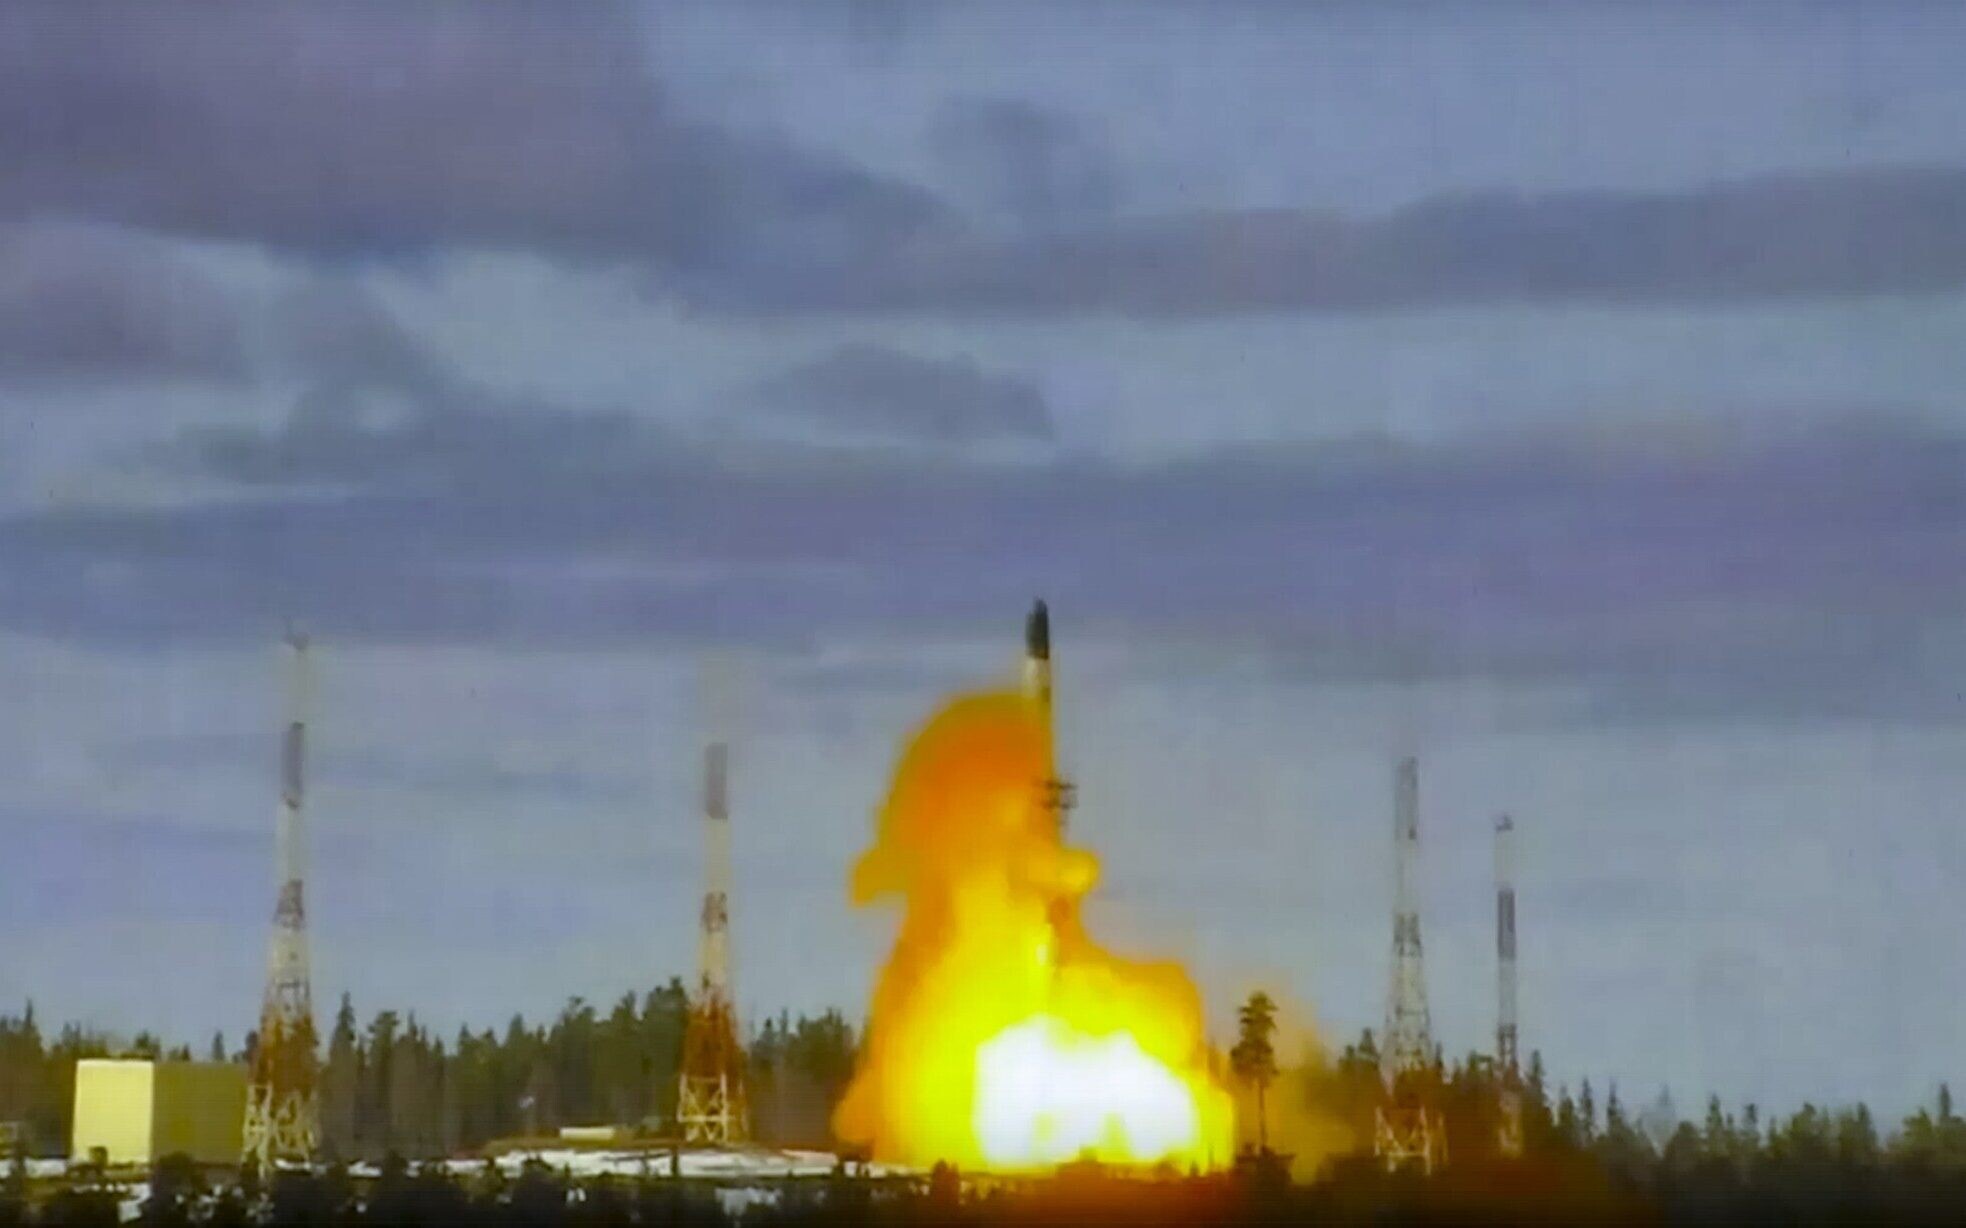 Russia tests new intercontinental ballistic missile, threatens West | The  Times of Israel